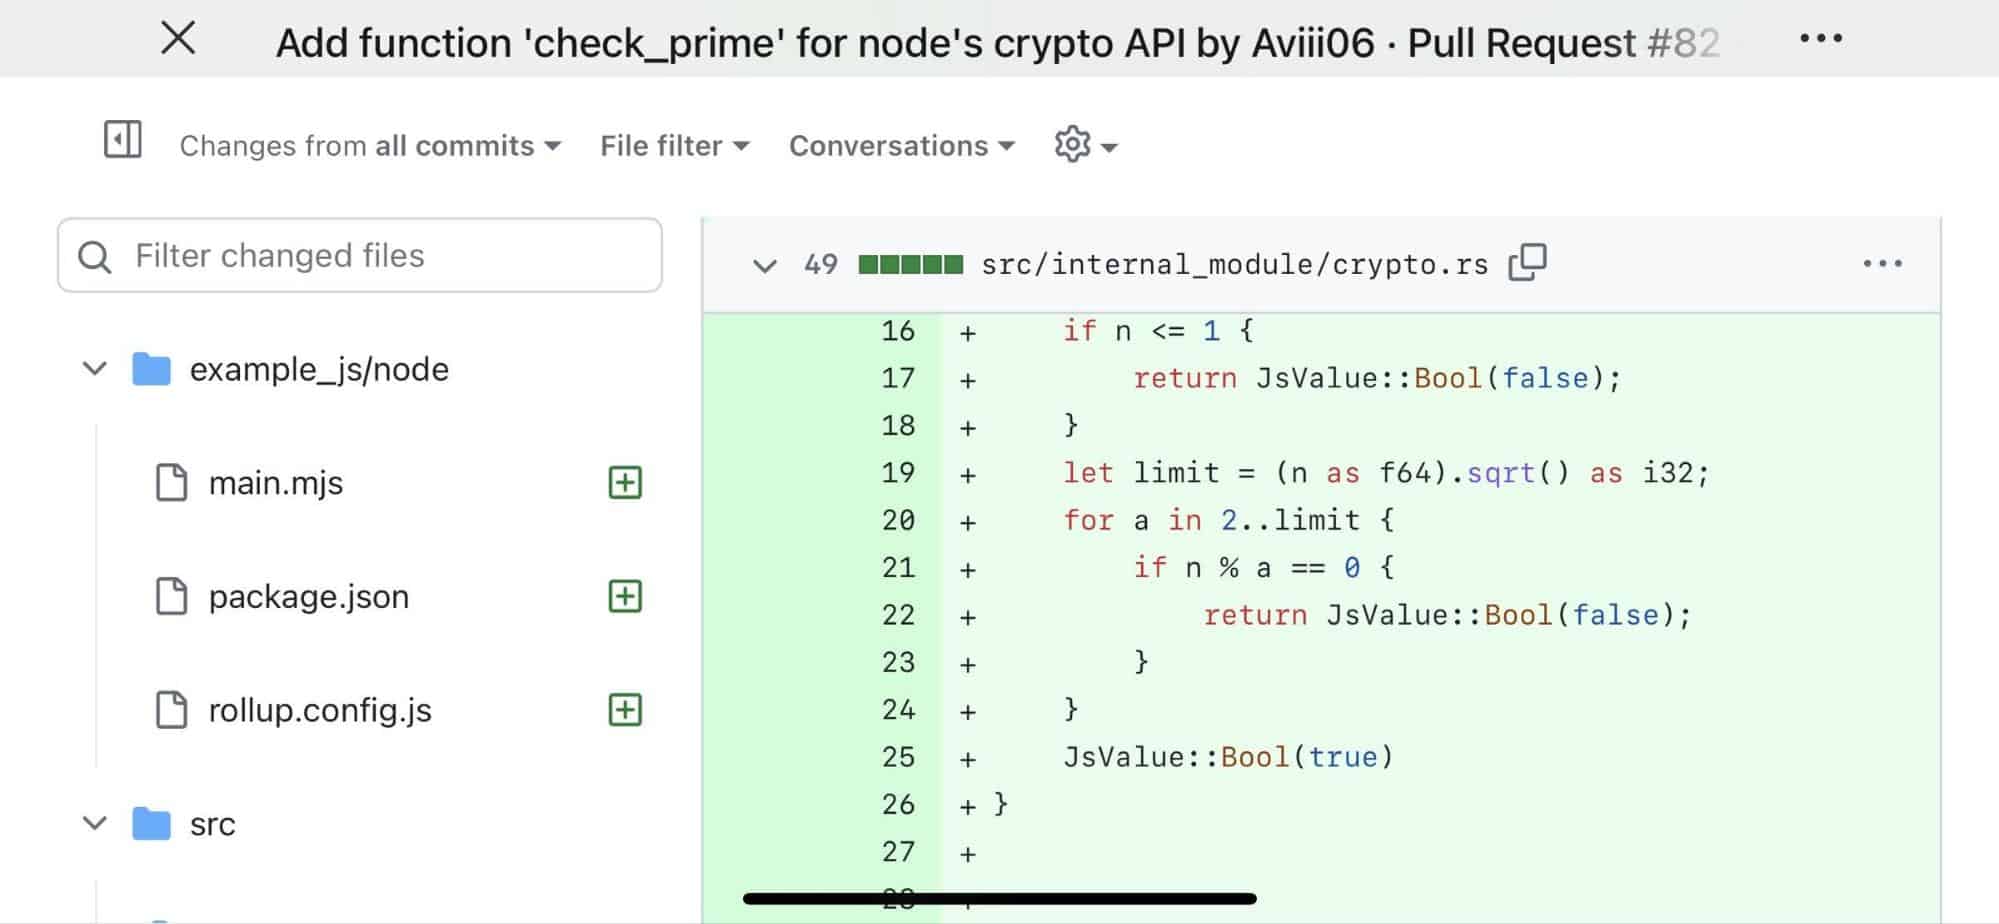 Screenshot showing add function 'check_prime' for node's crypto API code